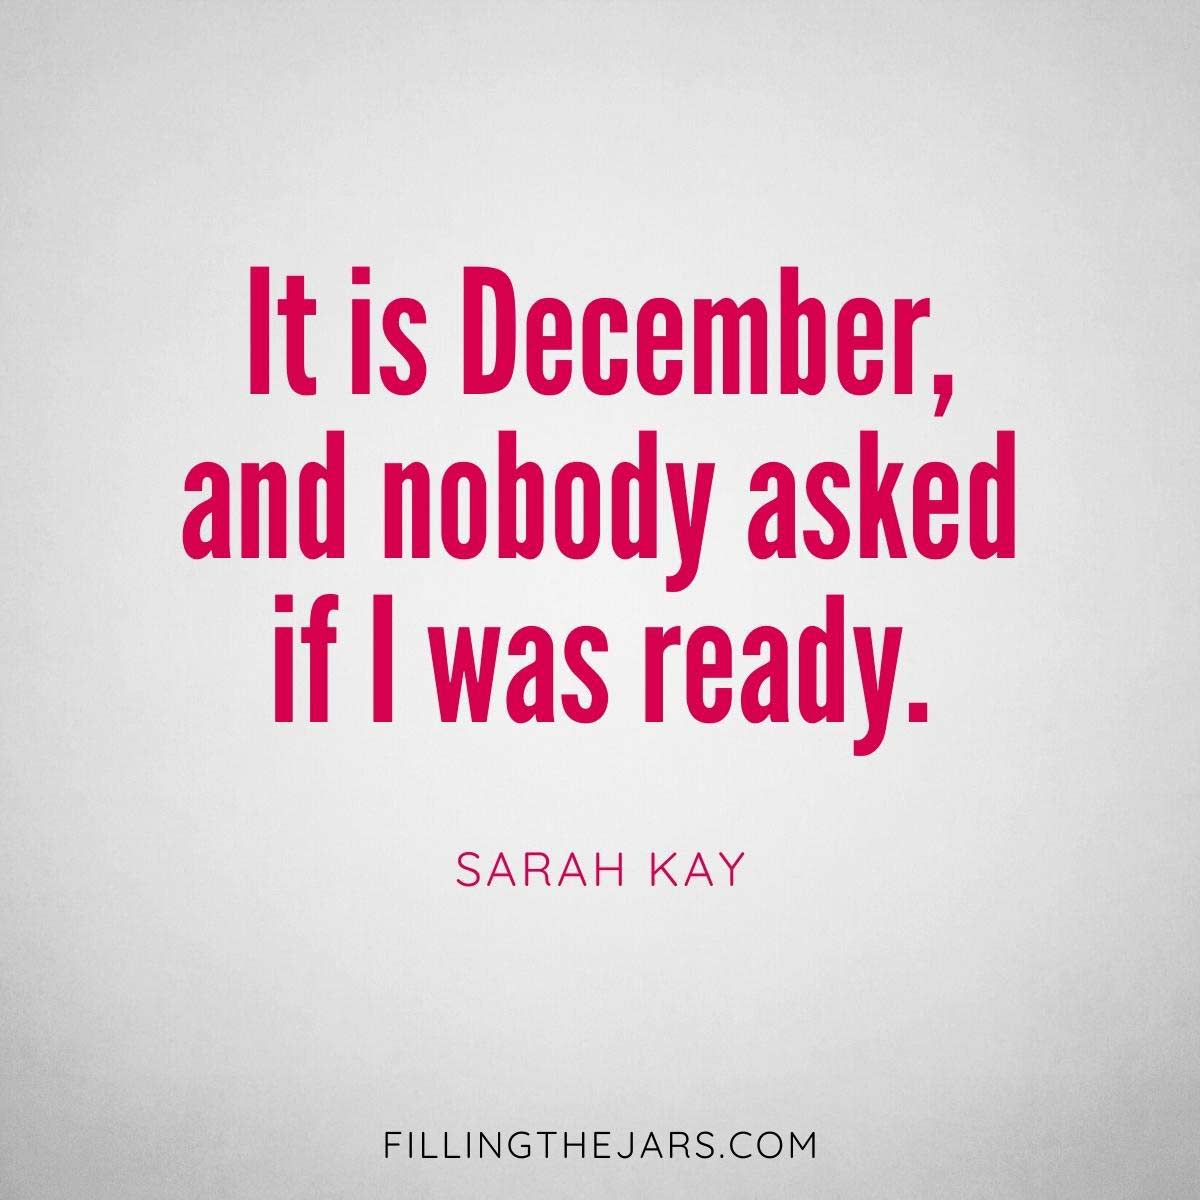 18 December Quotes That Will Inspire You to Enjoy the Month | Filling the  Jars